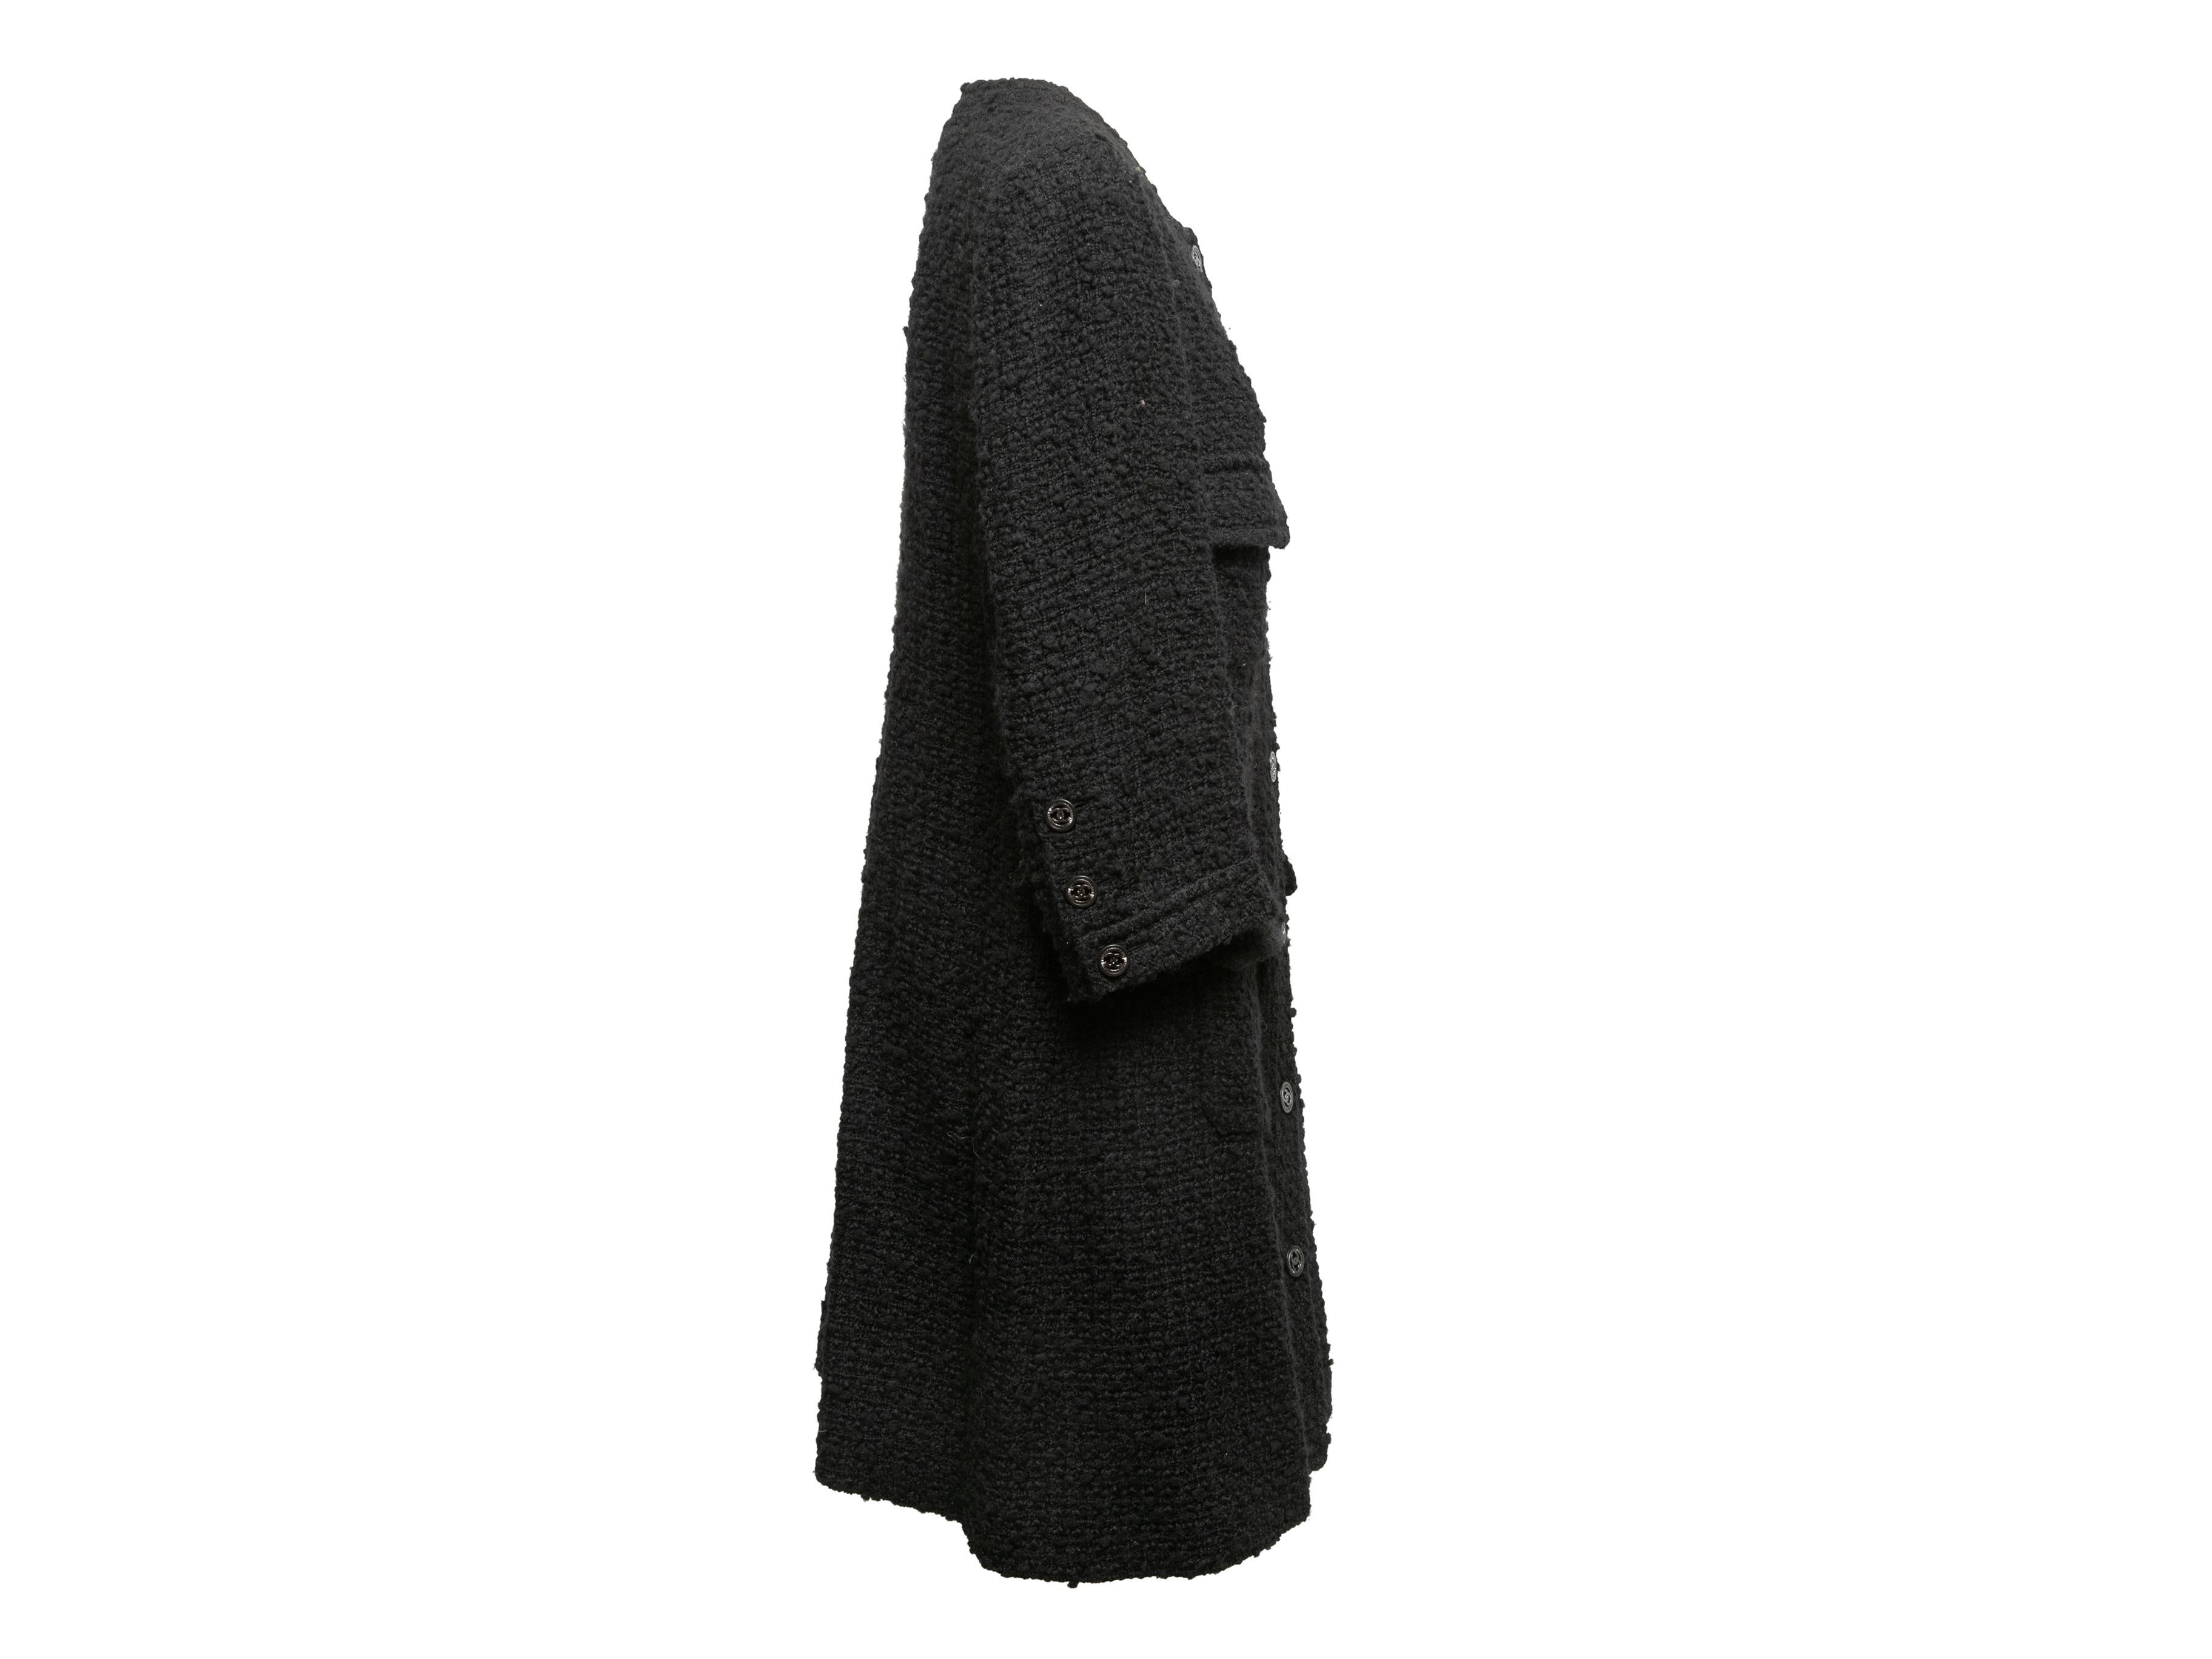 Black boucle wool long coat by Chanel. Crew neck. Four flap pockets. Front button closures. 42